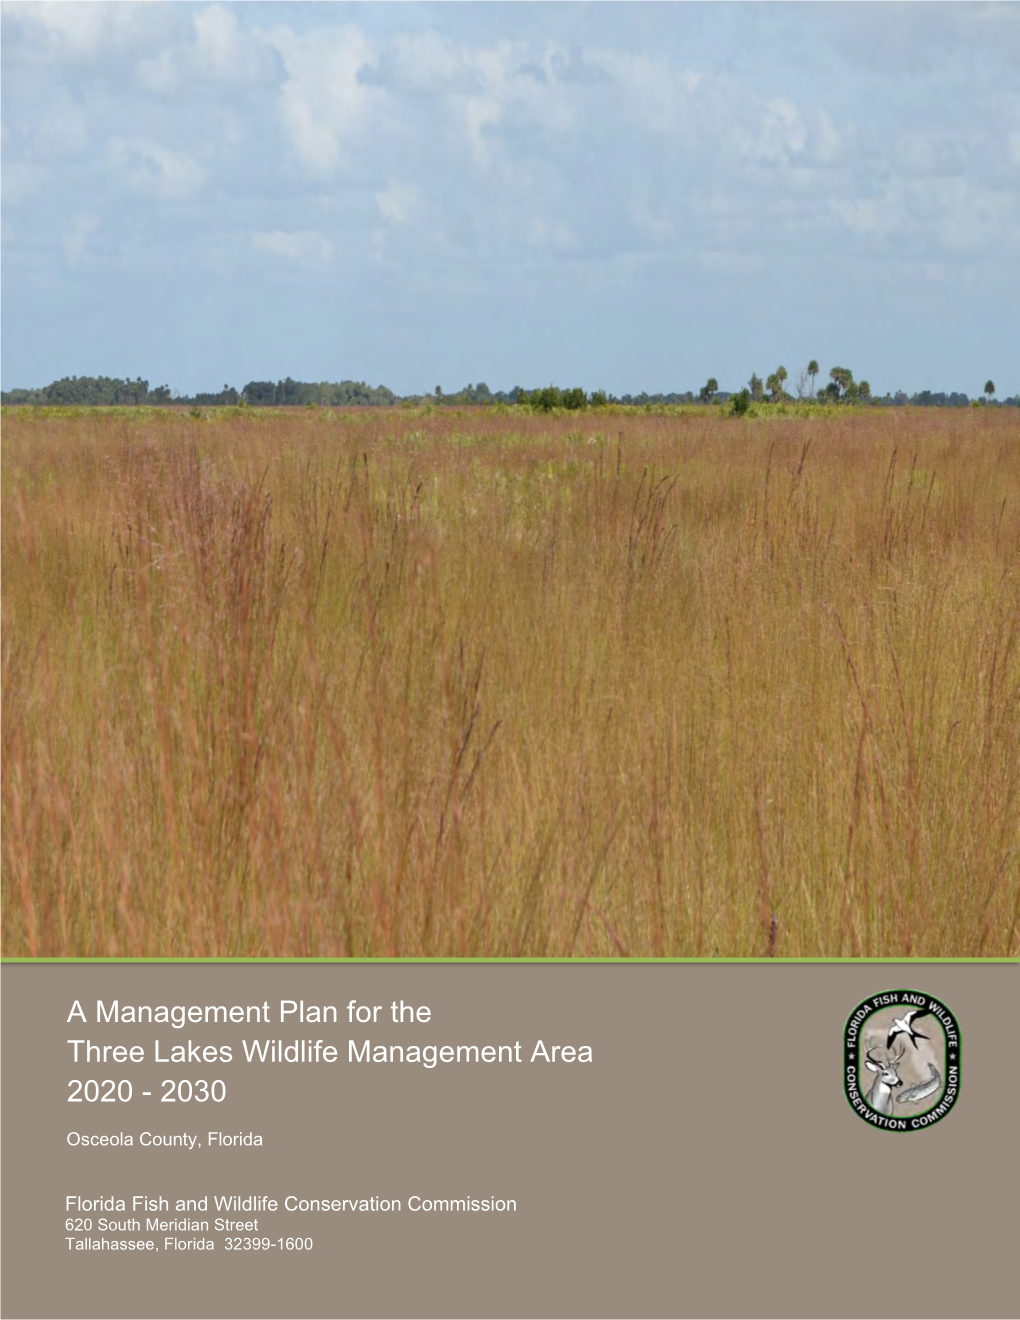 2020-2030 Management Plan for the Three Lakes Wildlife